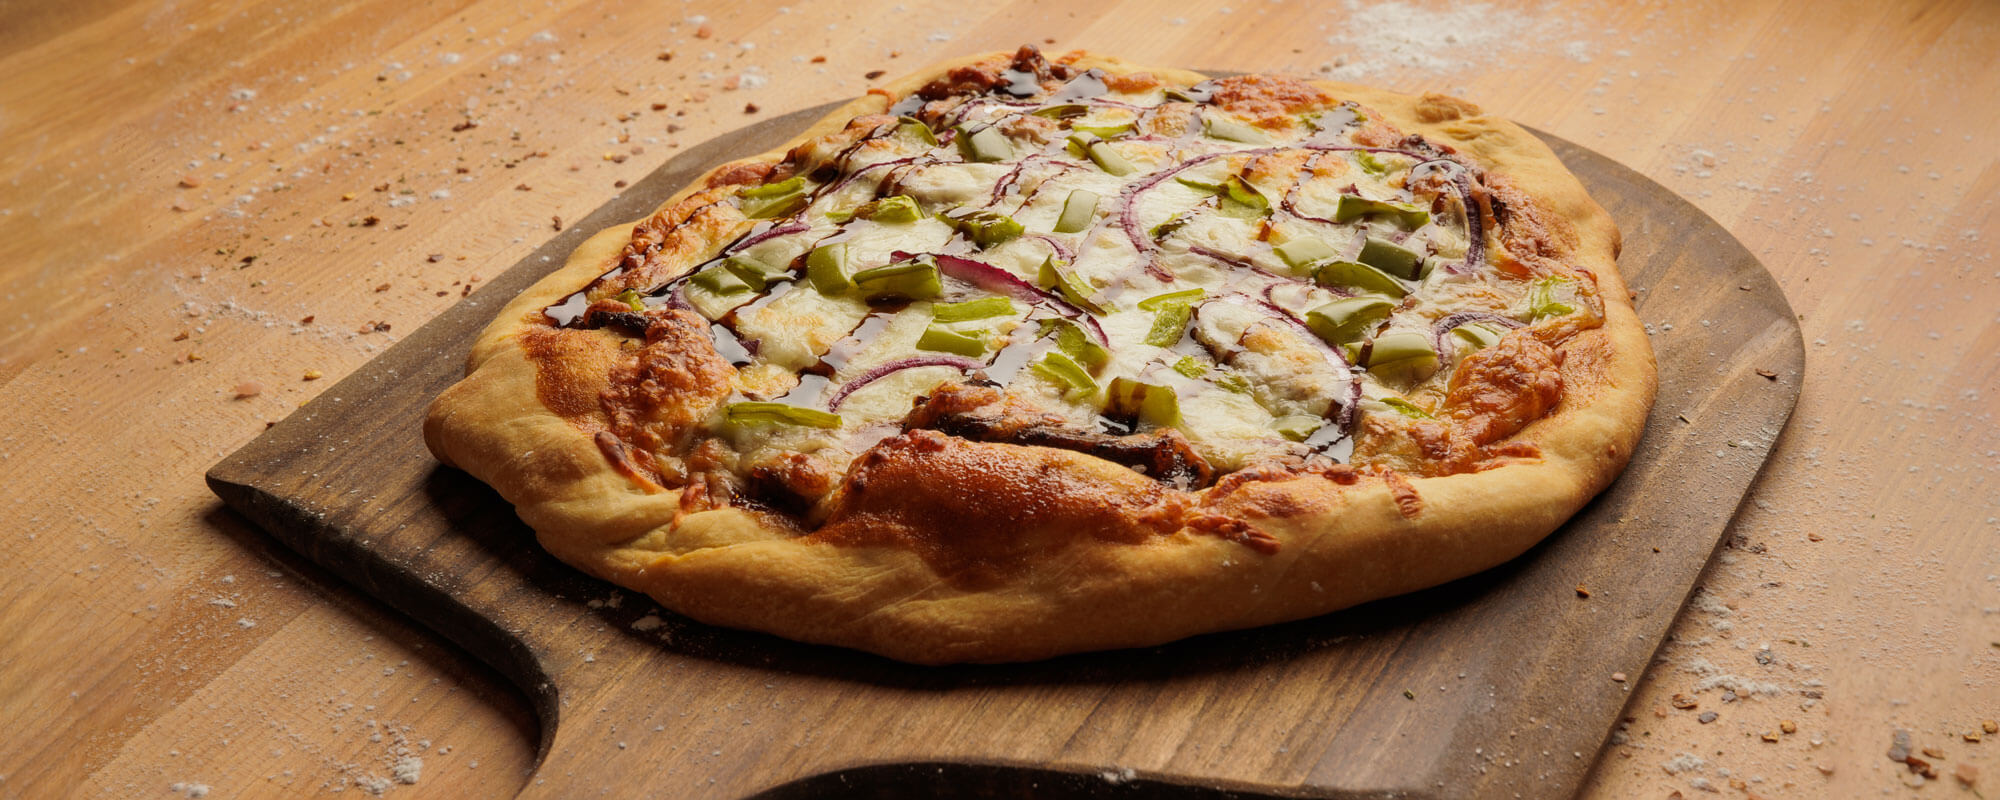 In the Kitchen: BBQ Steak and Onion Pizza